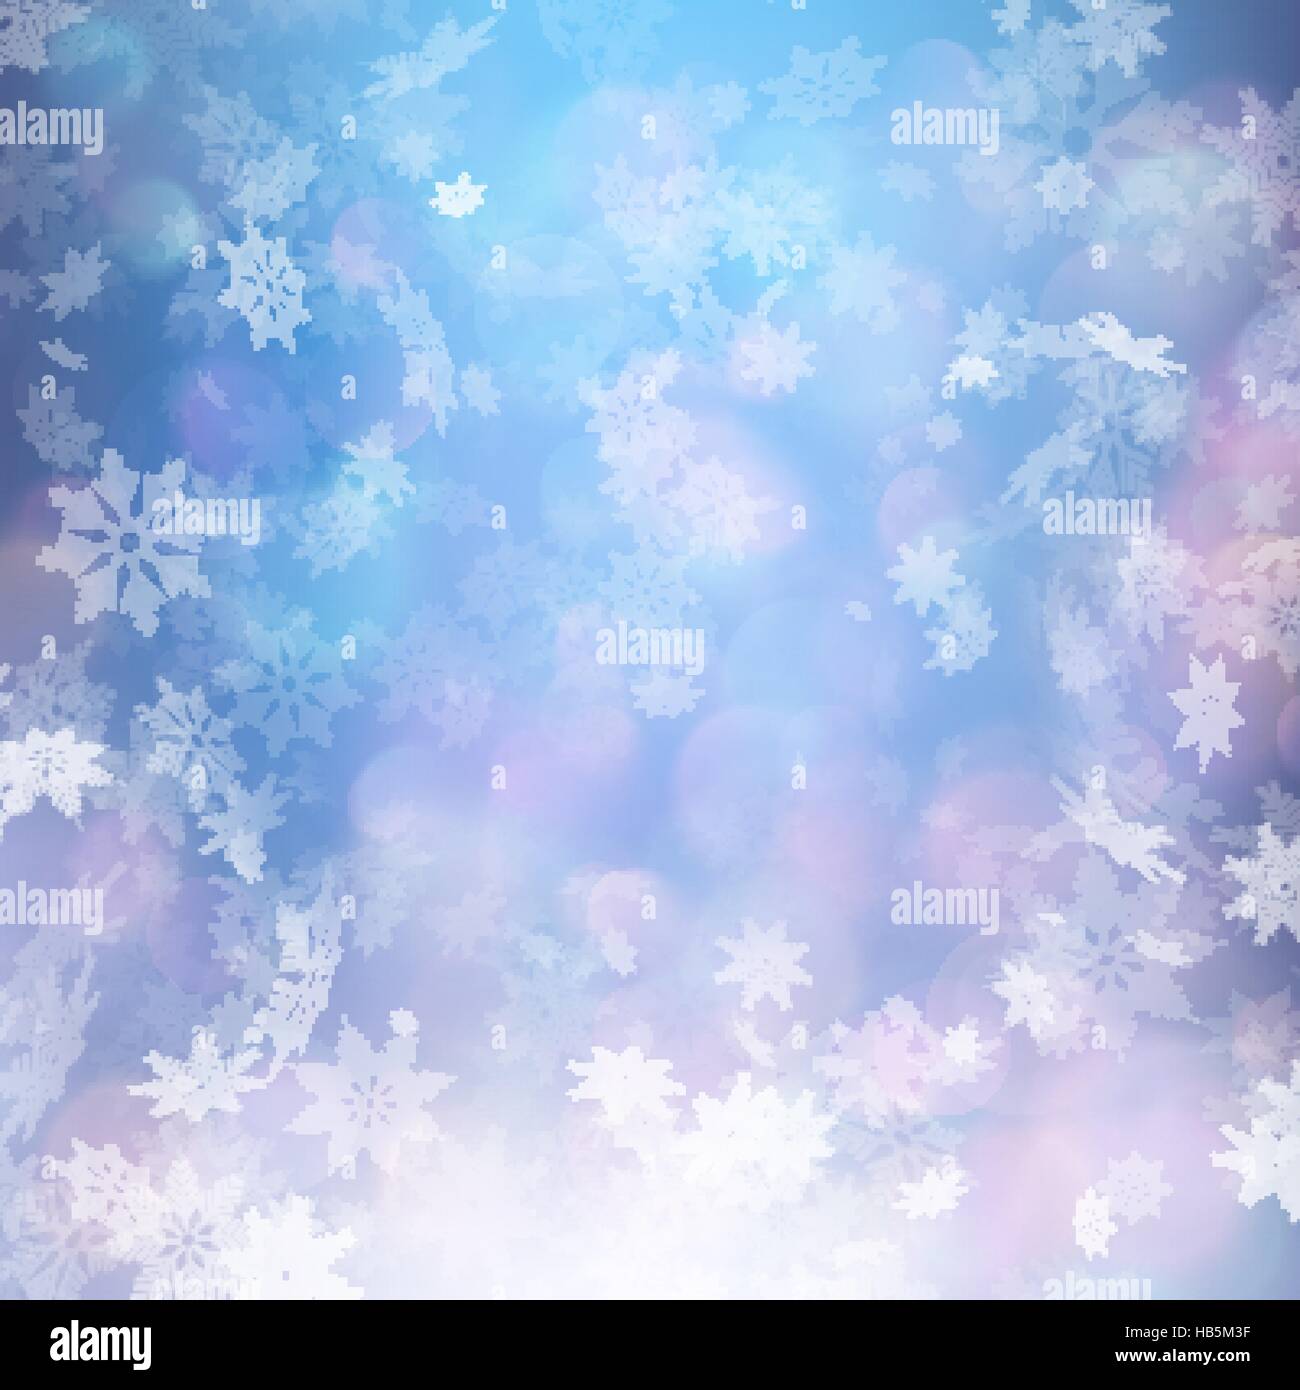 Christmas background with snowflakes. EPS 10 Stock Vector